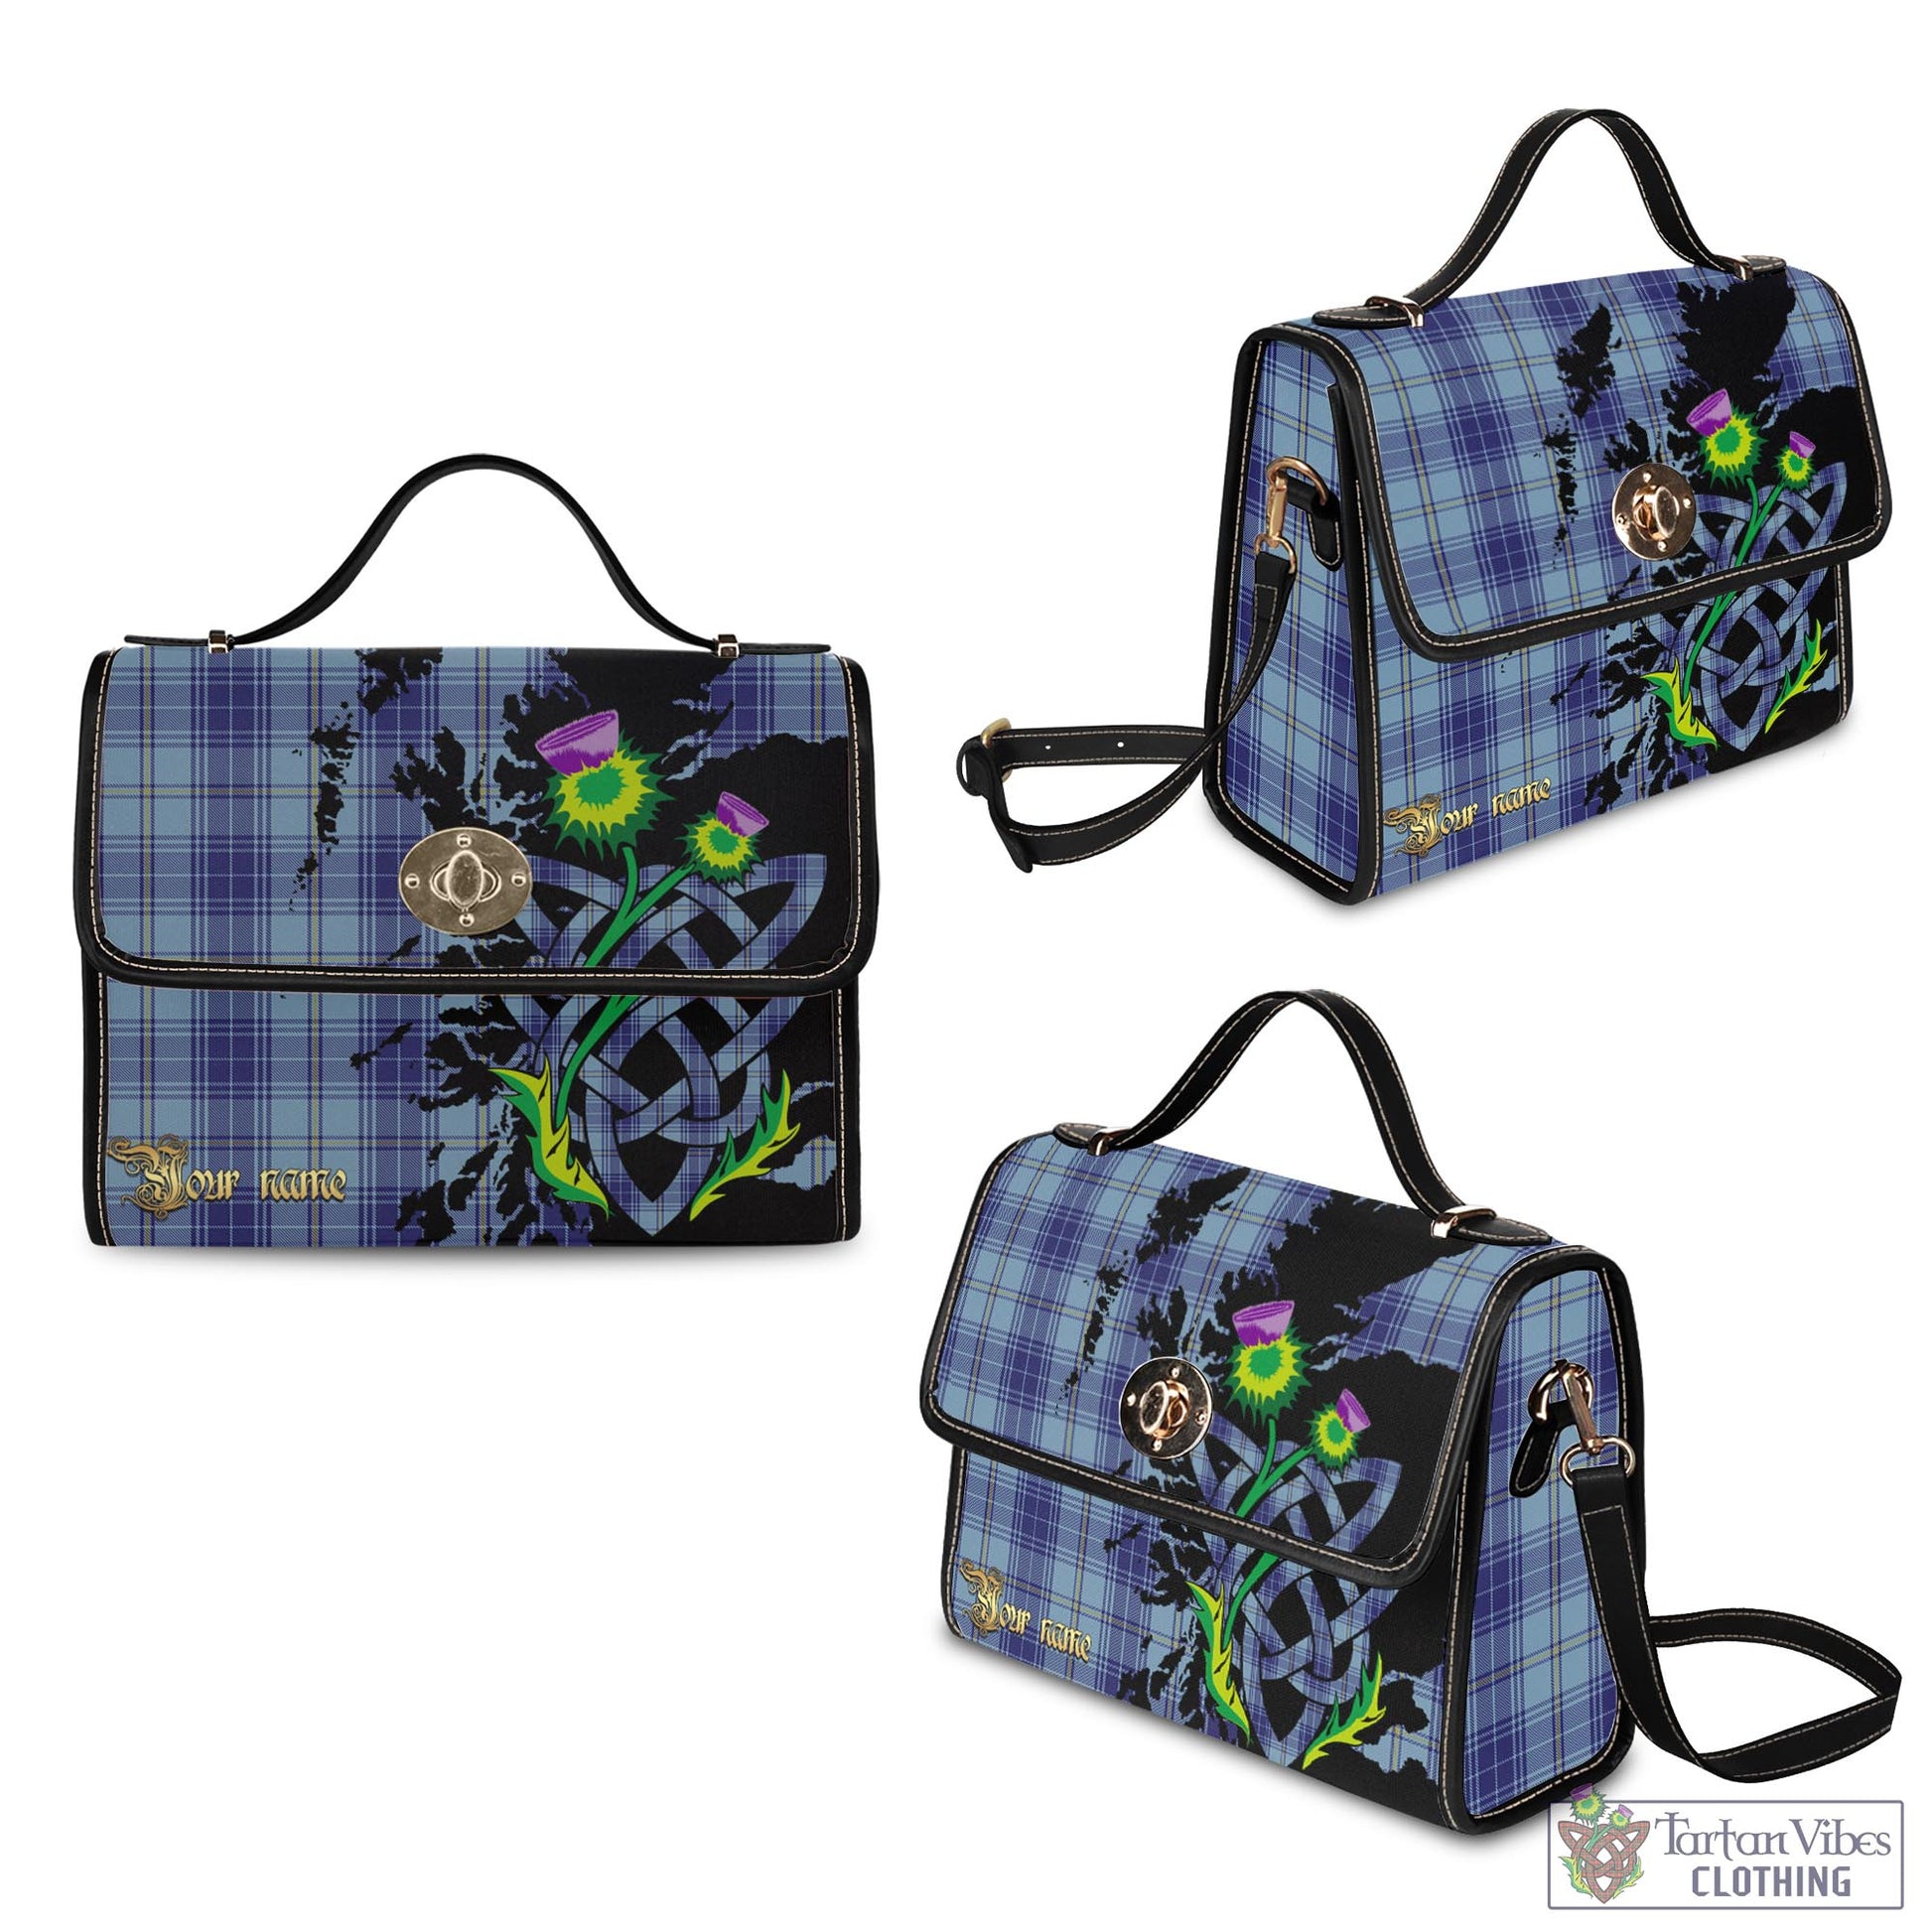 Tartan Vibes Clothing Traynor Tartan Waterproof Canvas Bag with Scotland Map and Thistle Celtic Accents